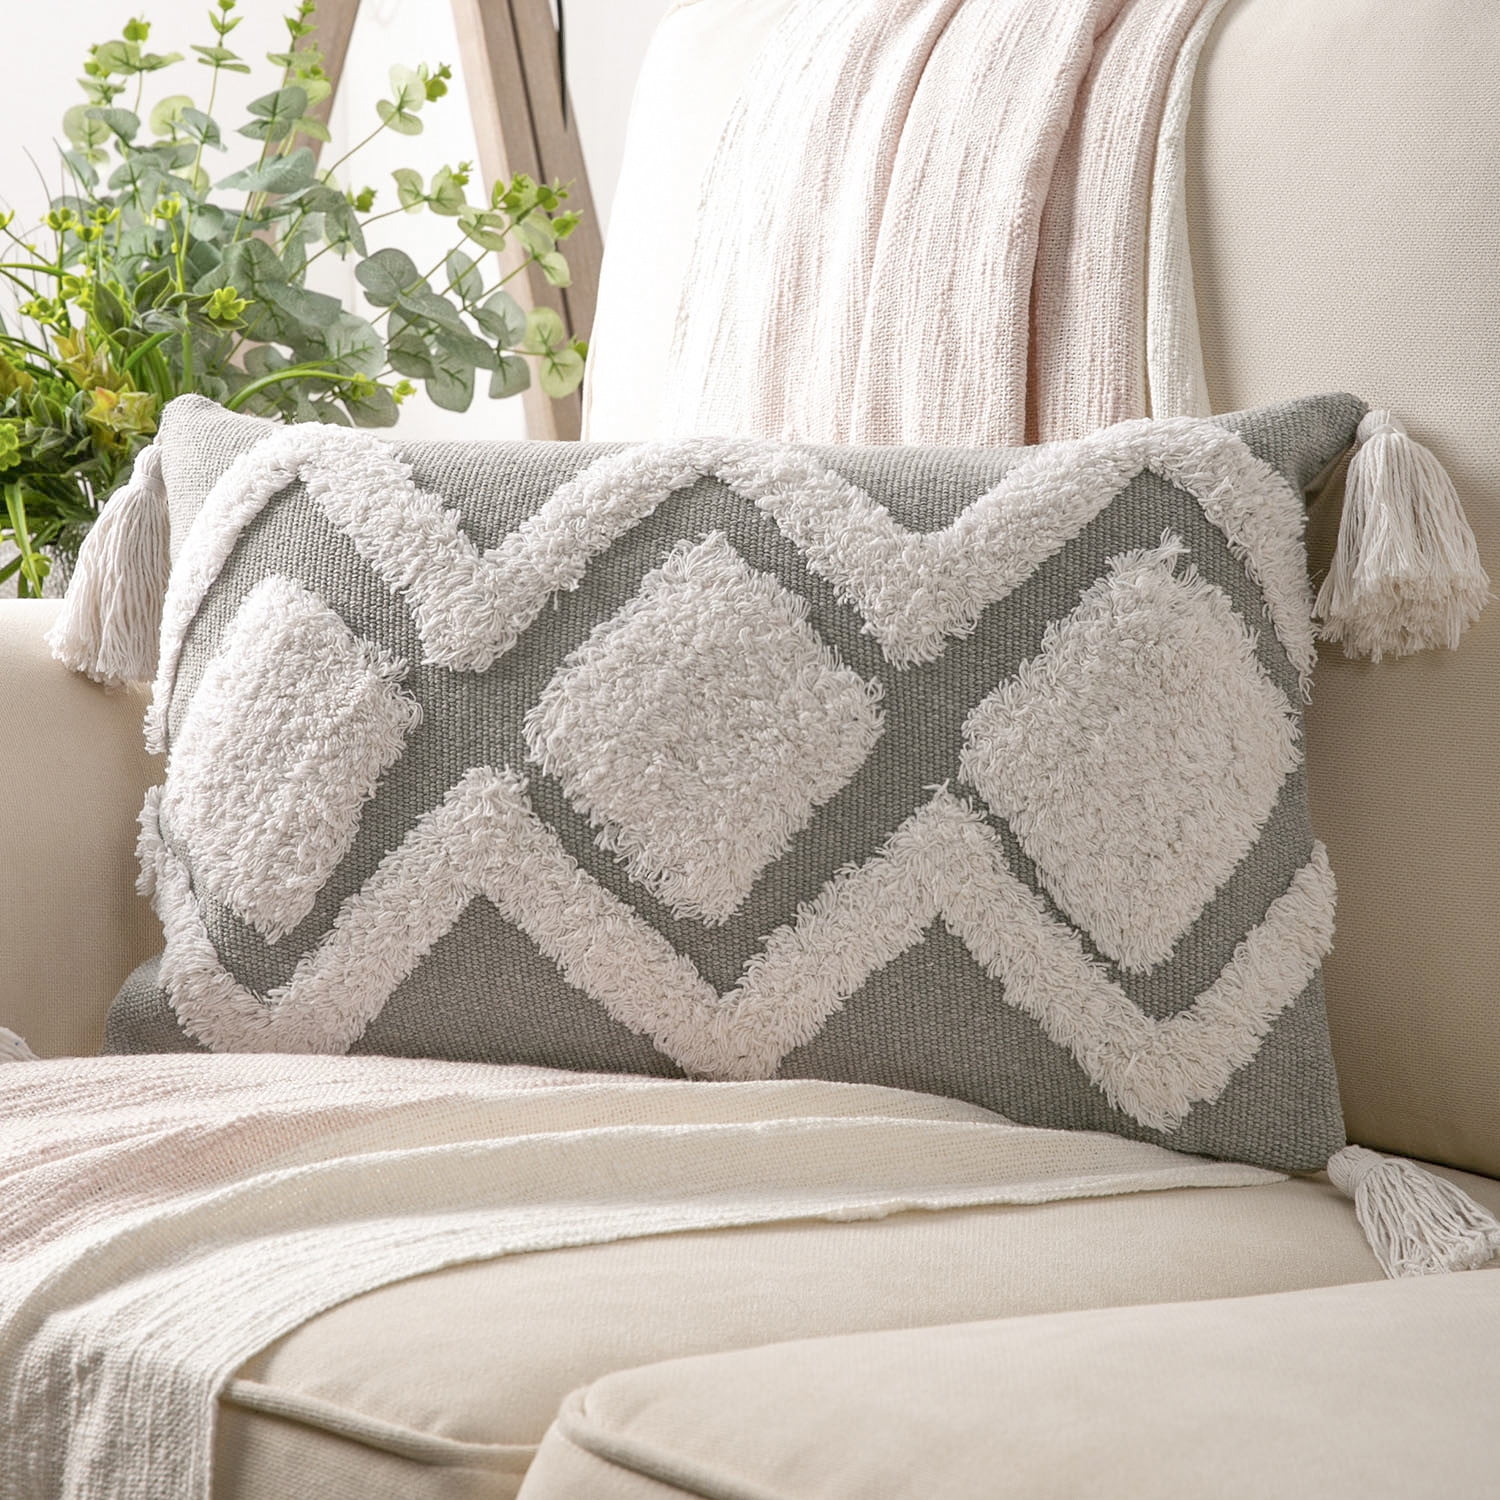 Phantoscope Boho Woven Tufted with Tassel Series Decorative Throw Pillow  Cover, 12 x 20, Gray/White, 1 Pack 